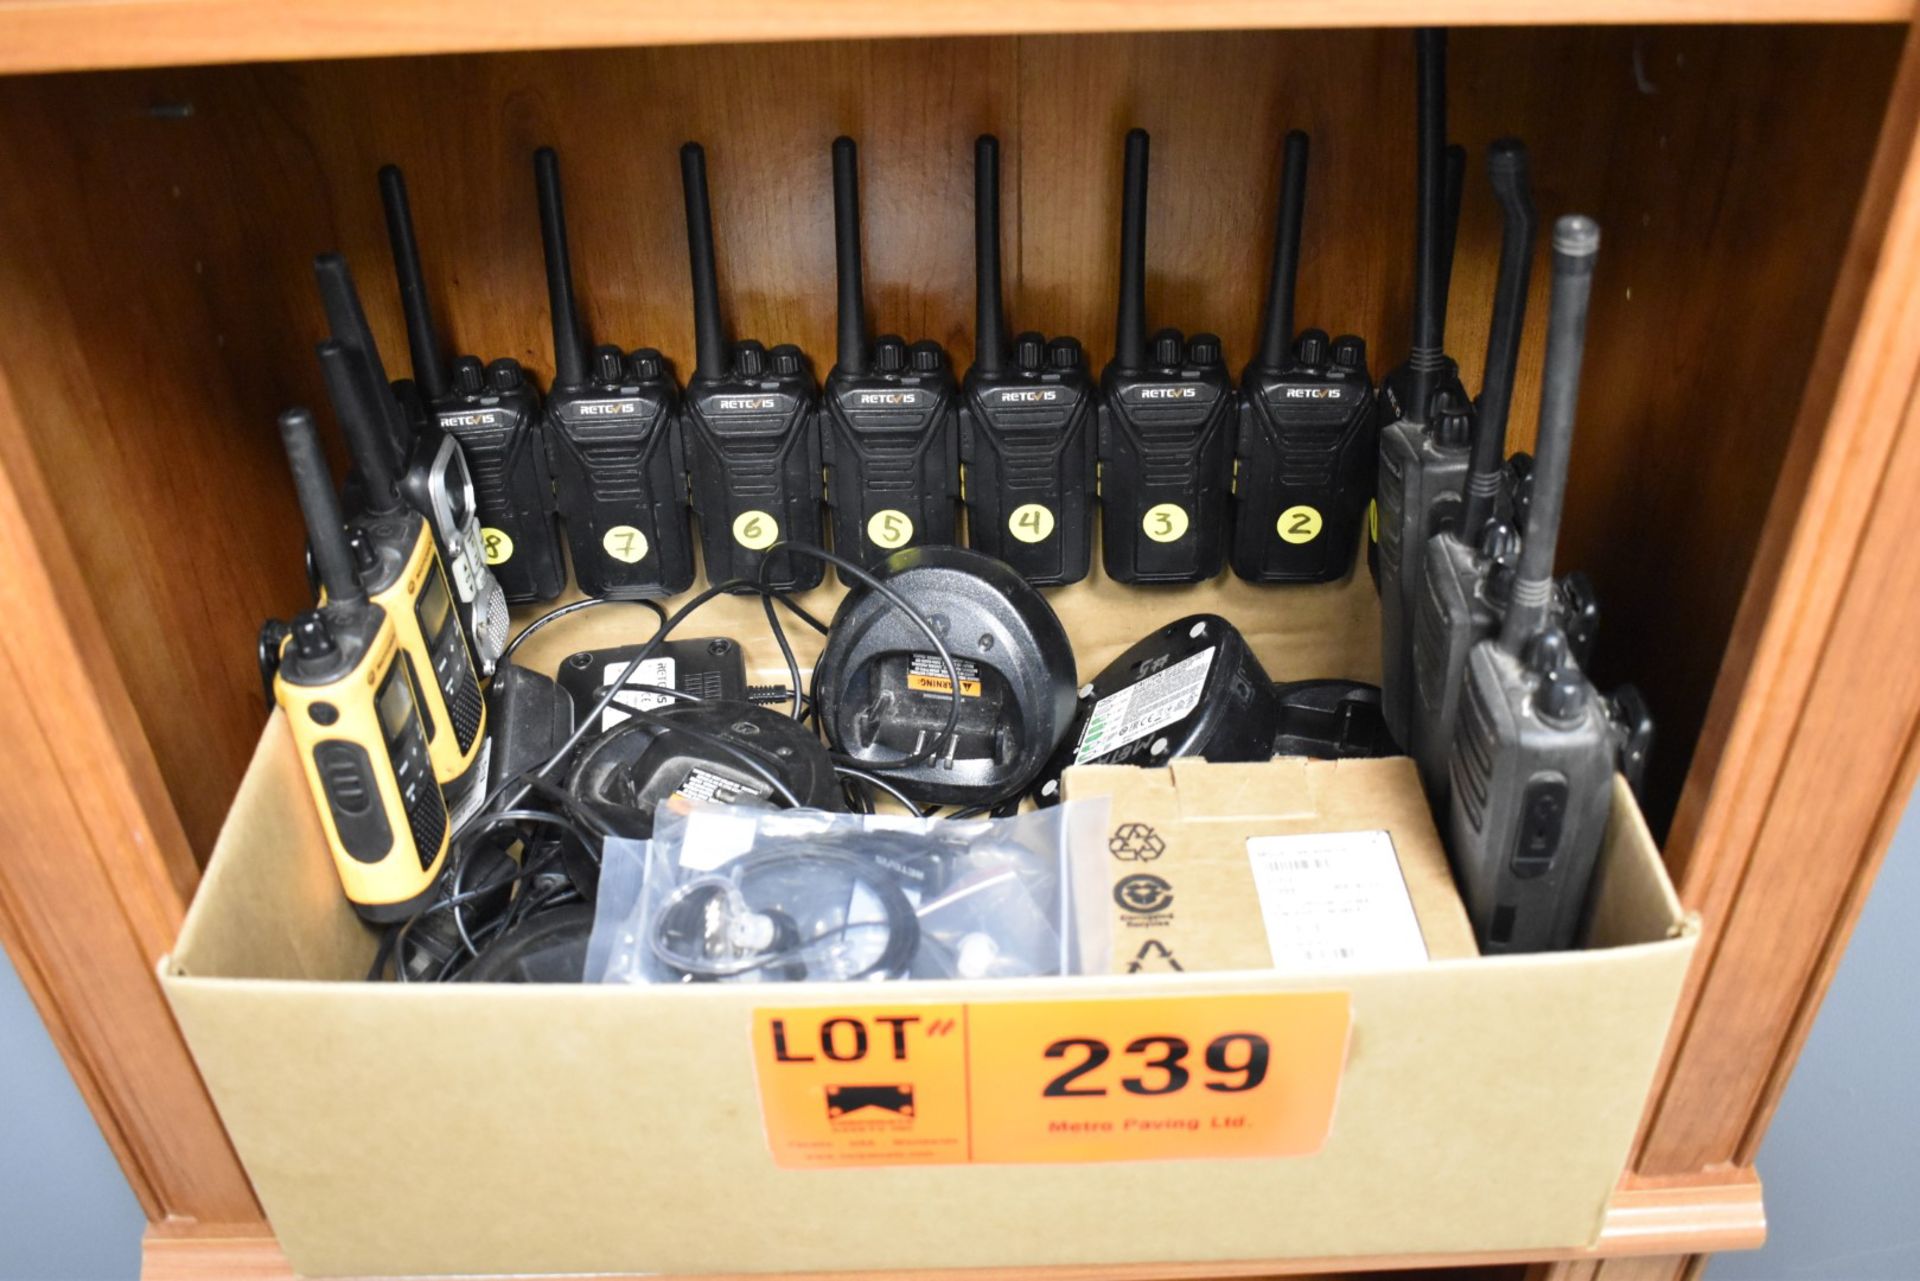 LOT/ WALKIE TALKIES AND CHARGERS